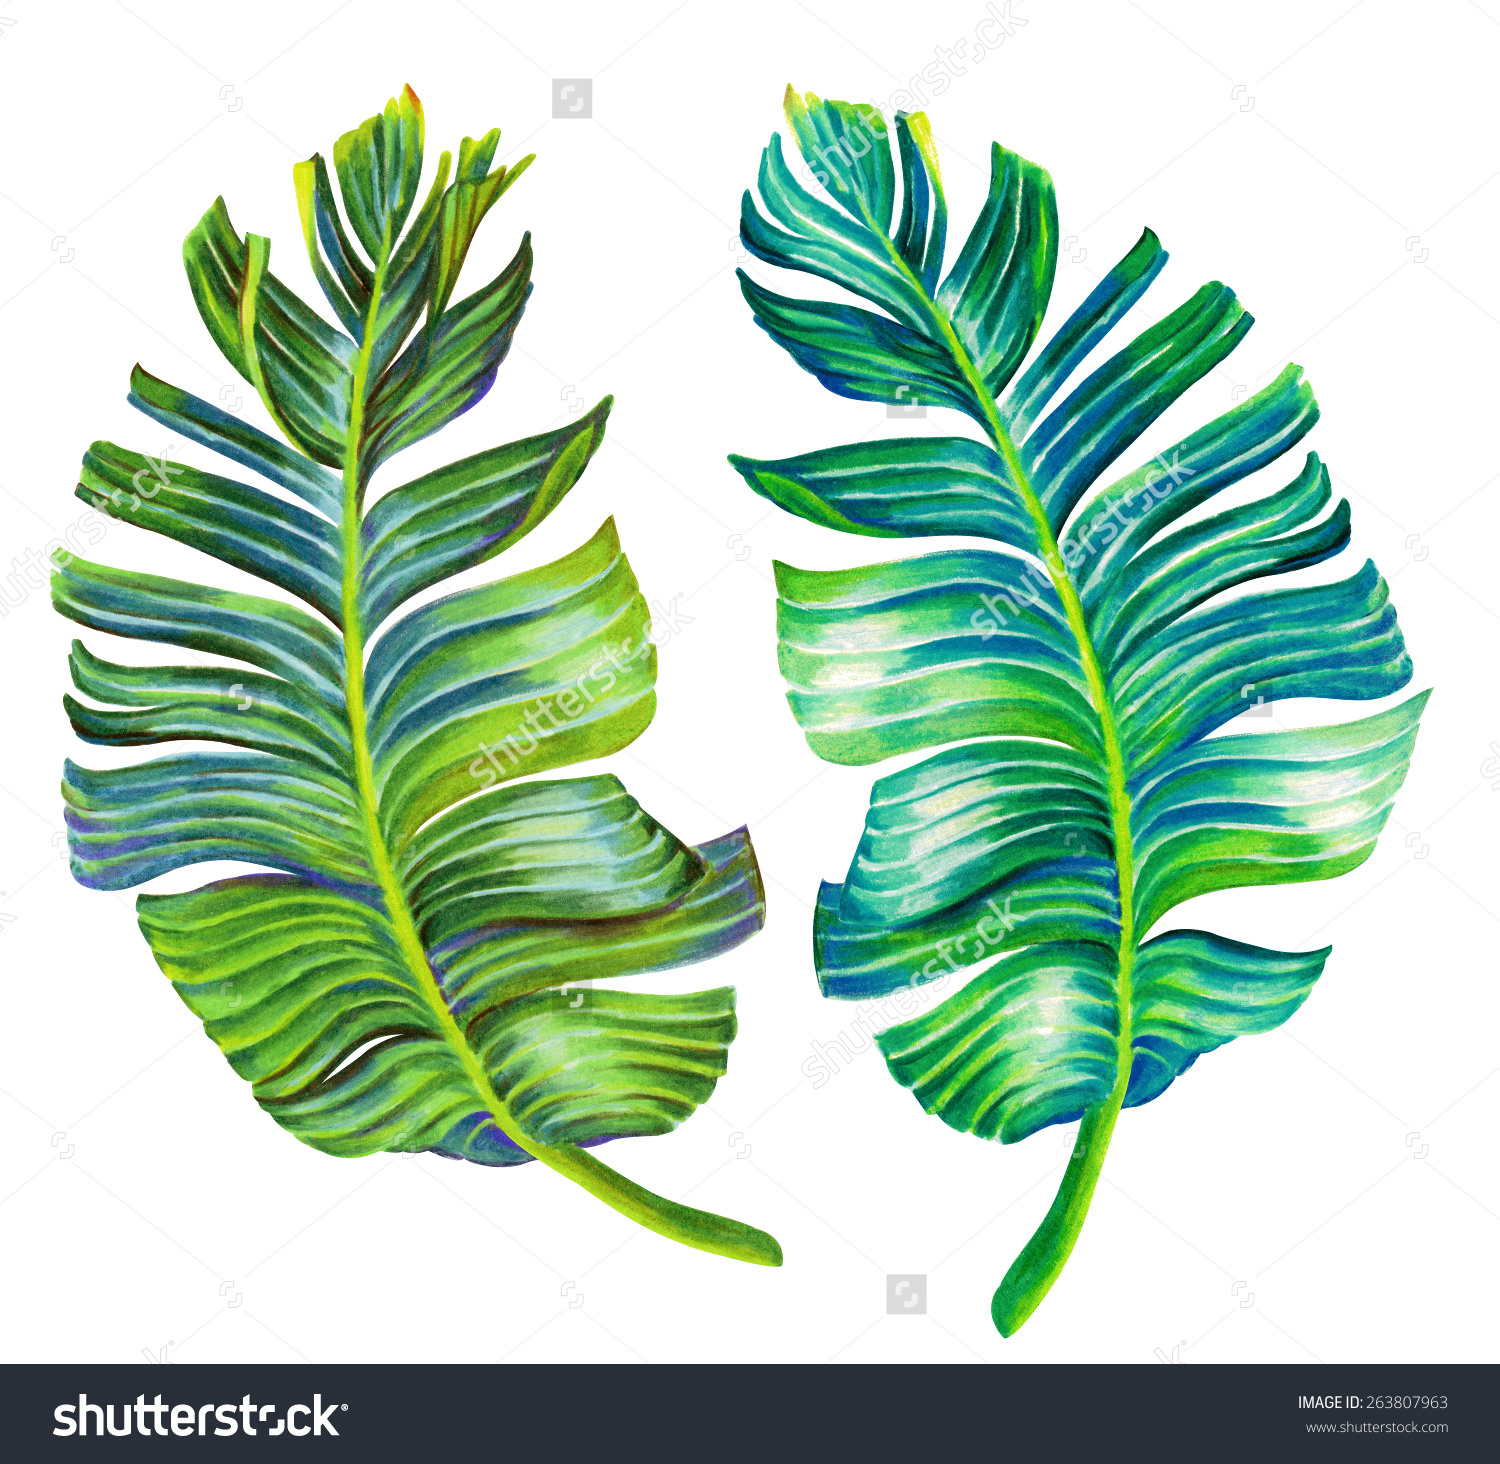 Palm Tree Leaves Drawing at GetDrawings.com | Free for personal use ...